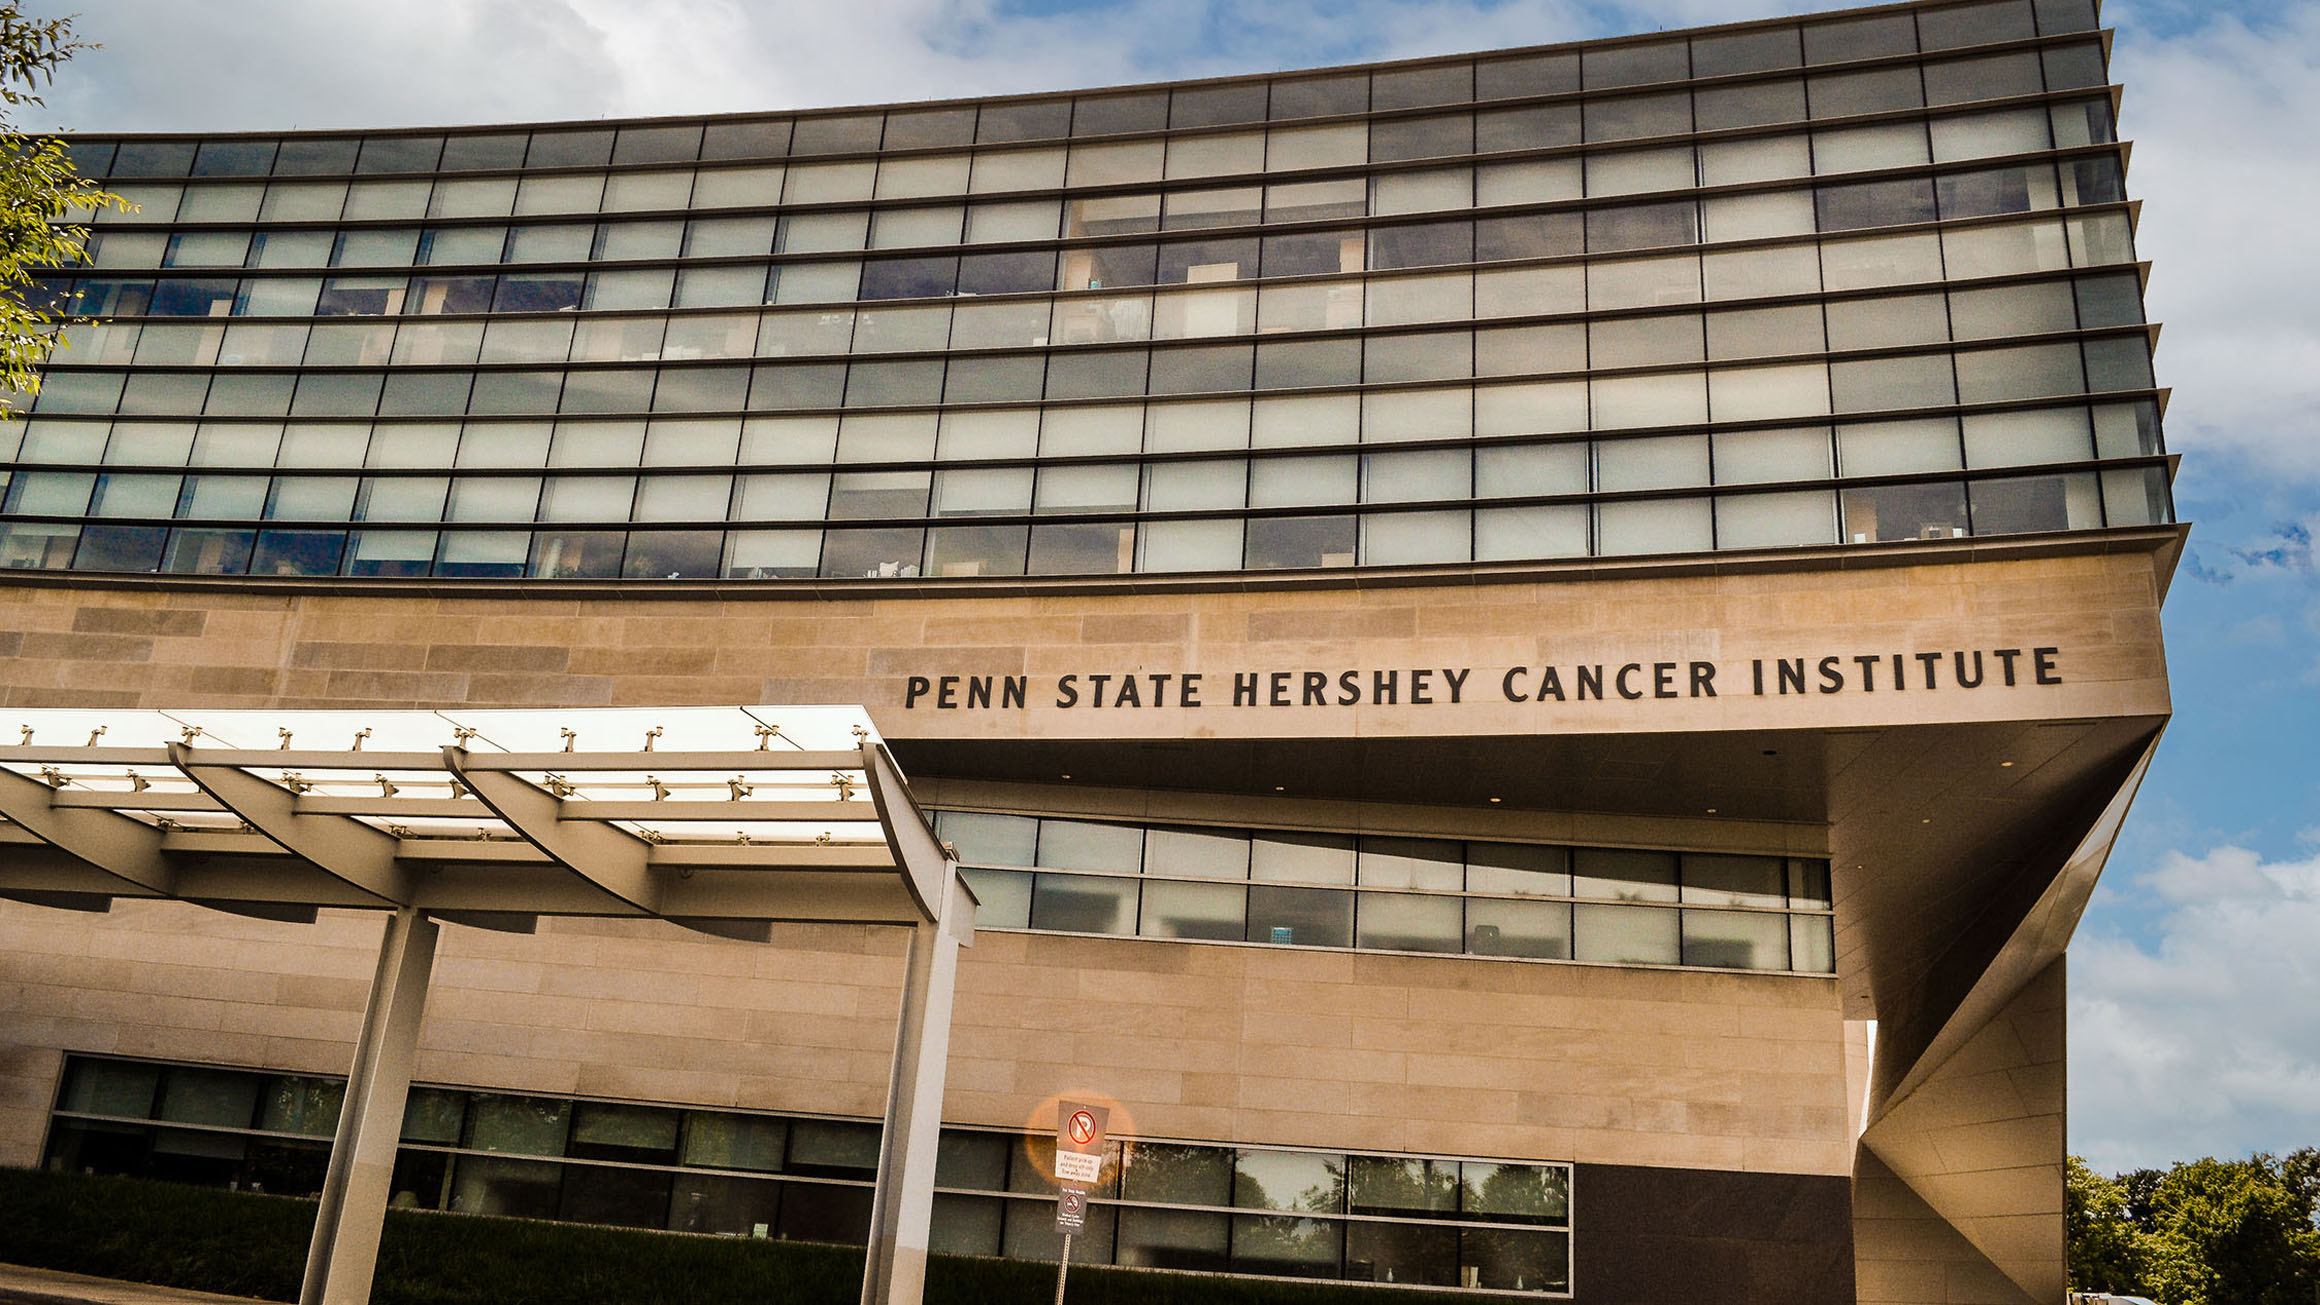 The photo shows a multi-story building with the words "Penn State Hershey Cancer Institute" written on it.